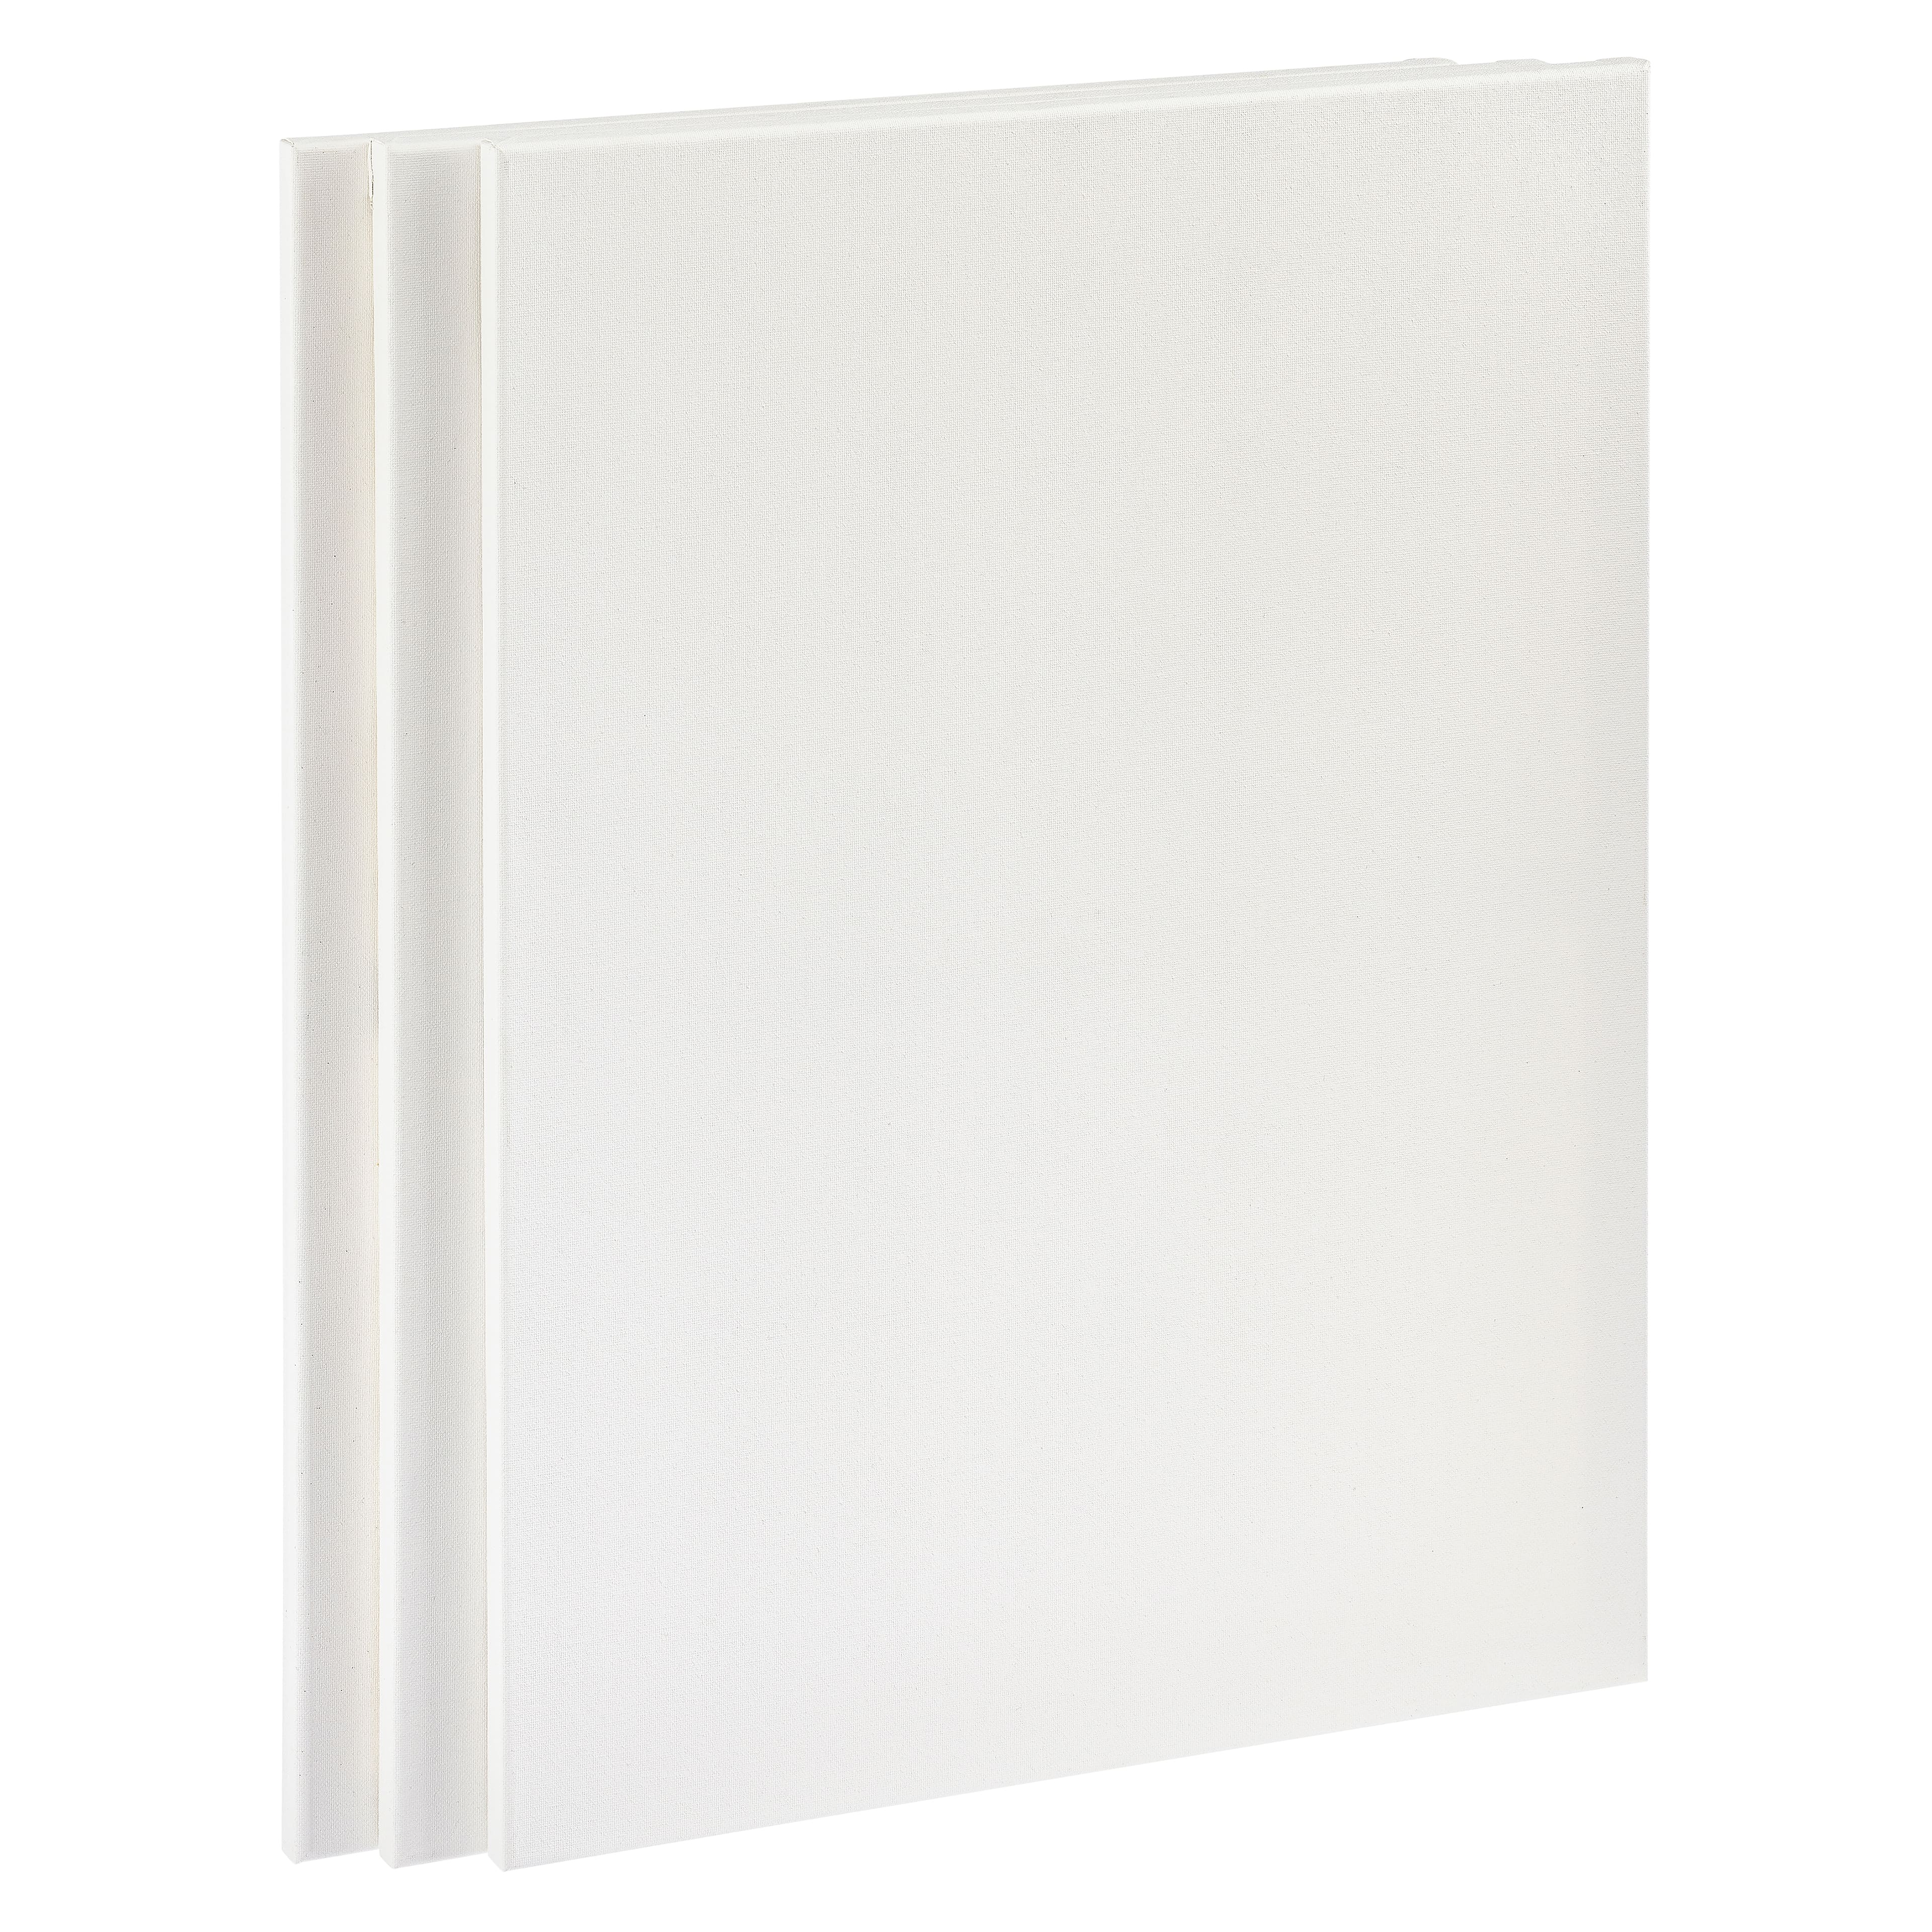 Pragati Systems® Medium Grain 18x24 Inch 7 Oz. Primed Canvas Board for  Painting CP1824, White (Pack of 1)